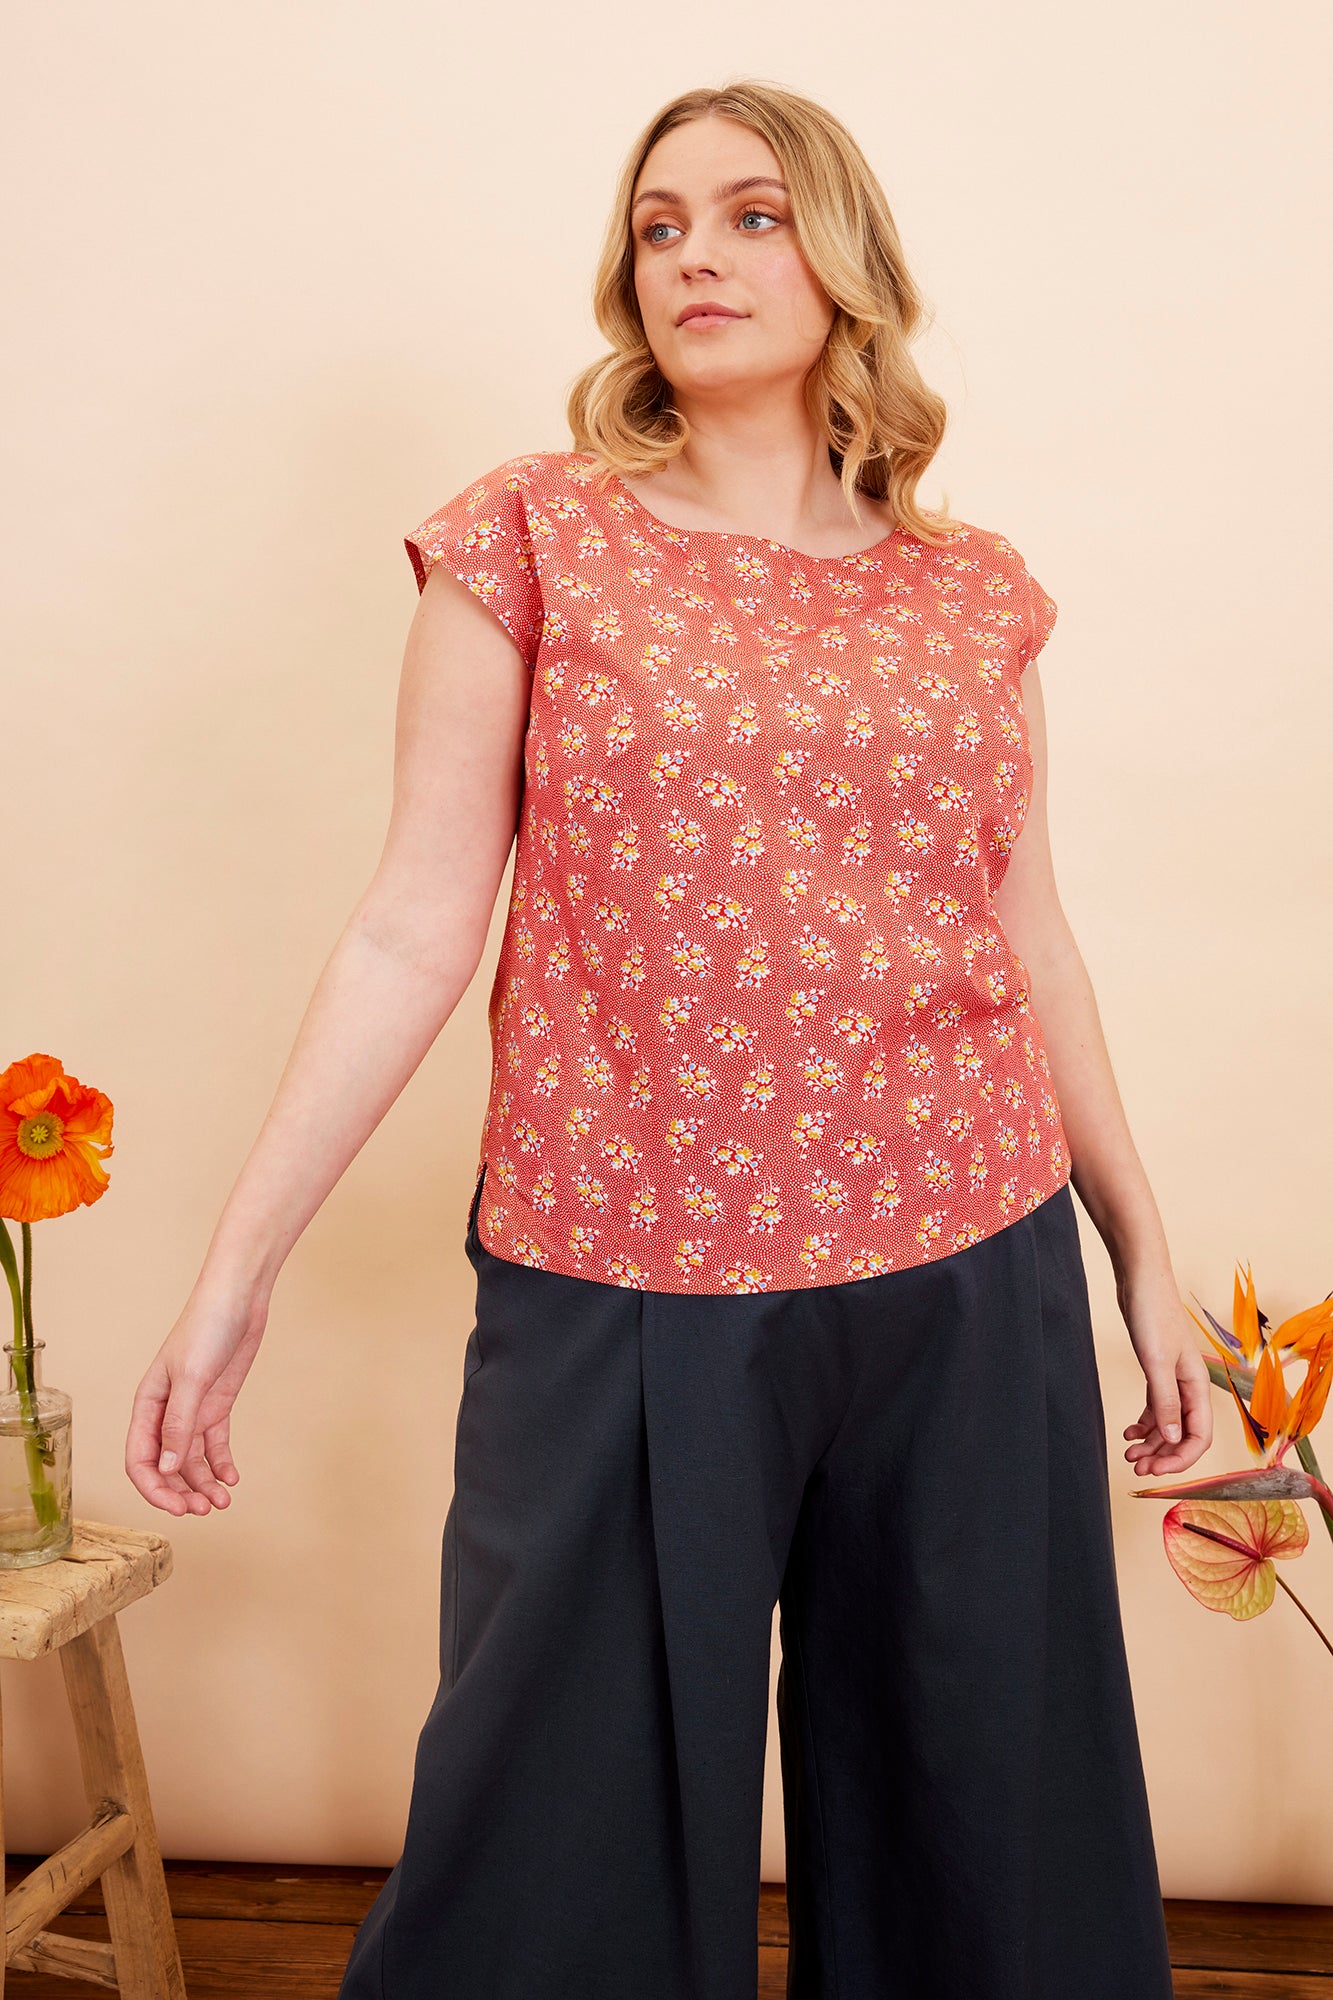 Image of Edna Paprika Ditsy Floral Top Carryover - Top